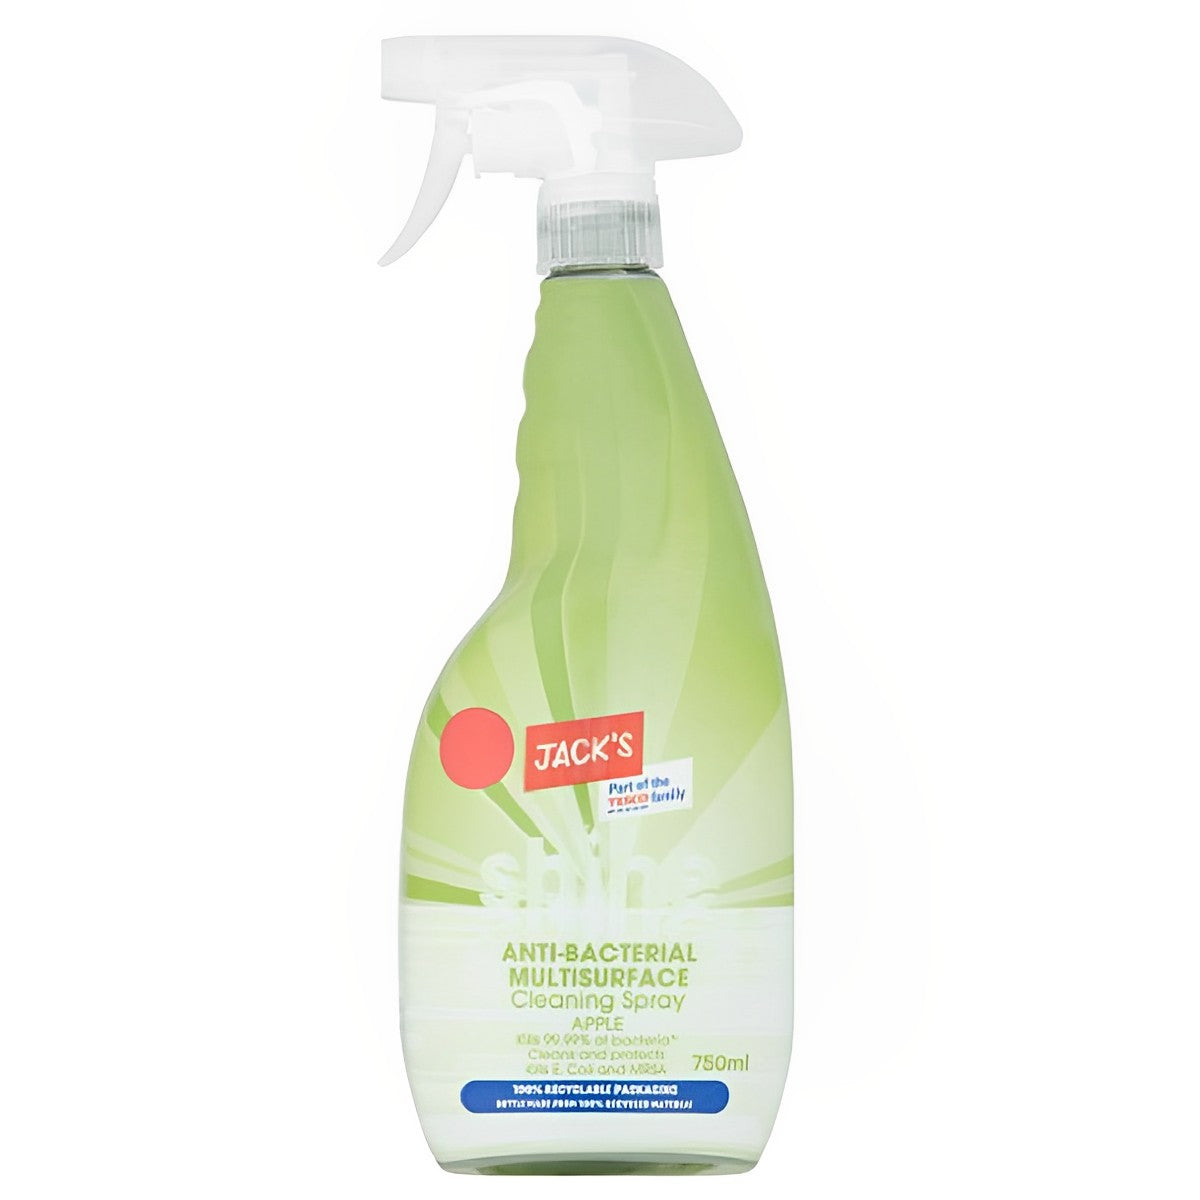 Jack's - Shine Anti-Bacterial Multisurface Cleaning Spray Apple - 750ml - Continental Food Store